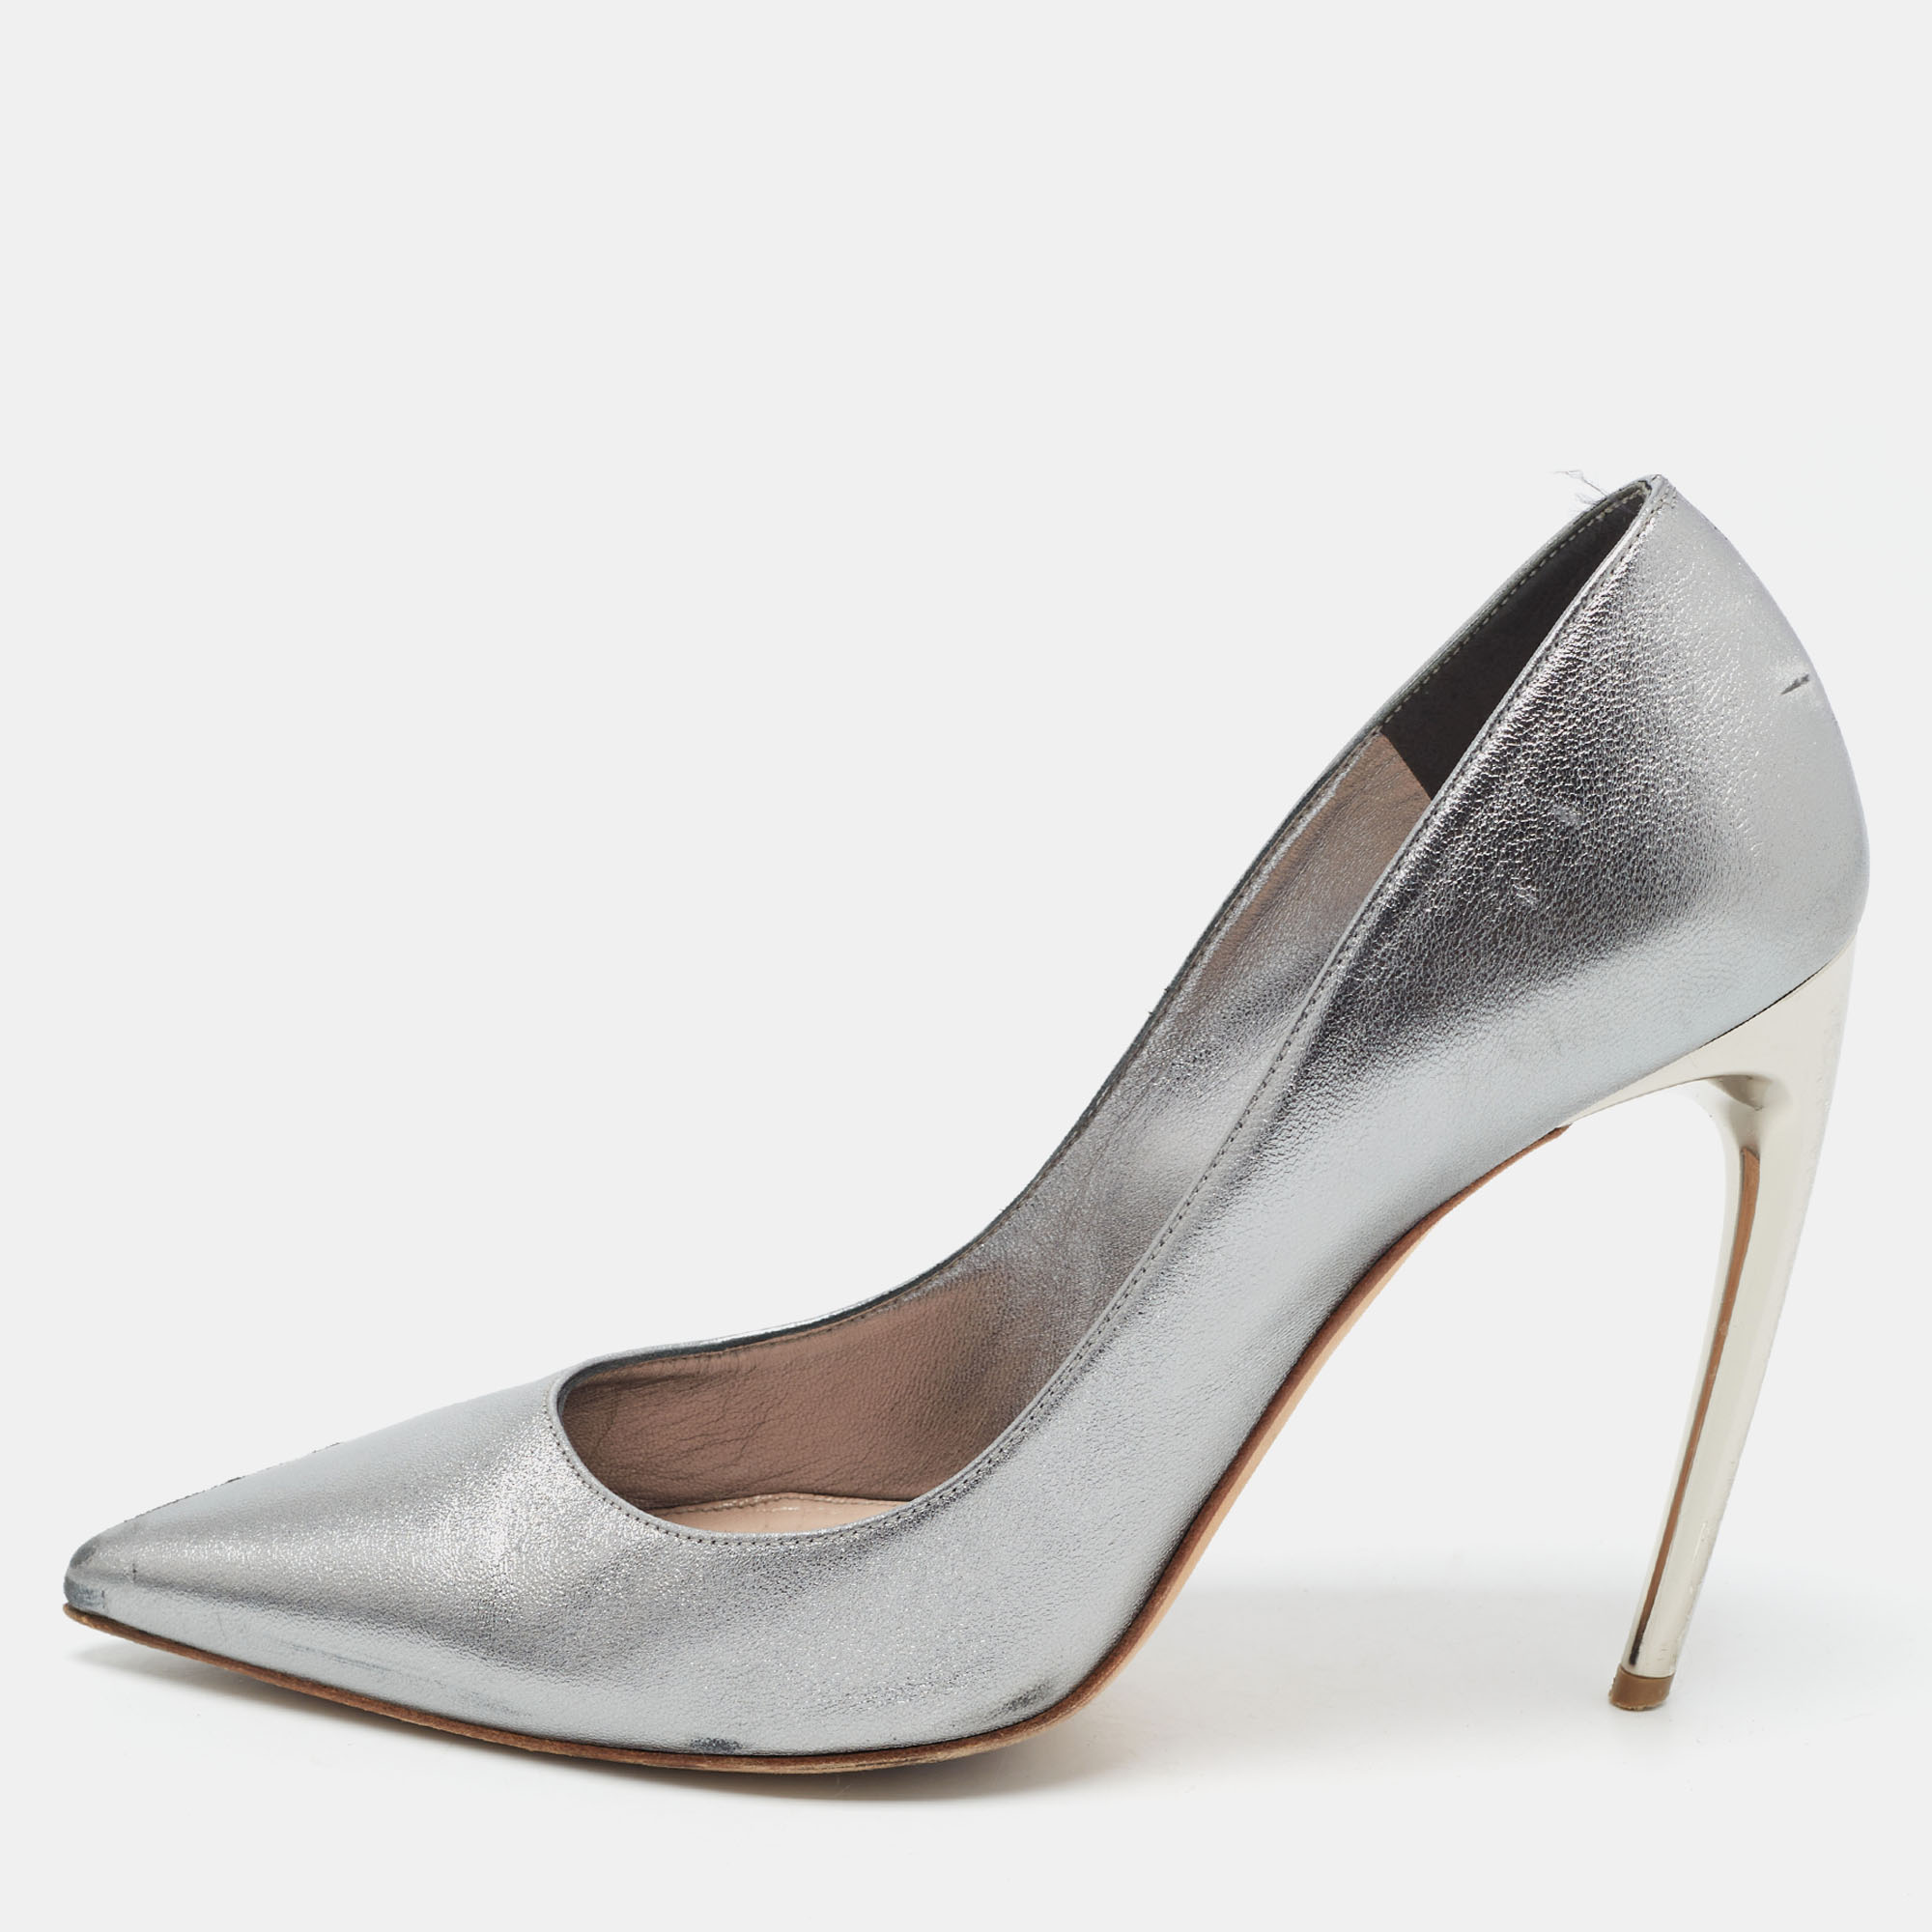 Pre-owned Alexander Mcqueen Metallic Leather Pointed Toe Pumps Size 38.5